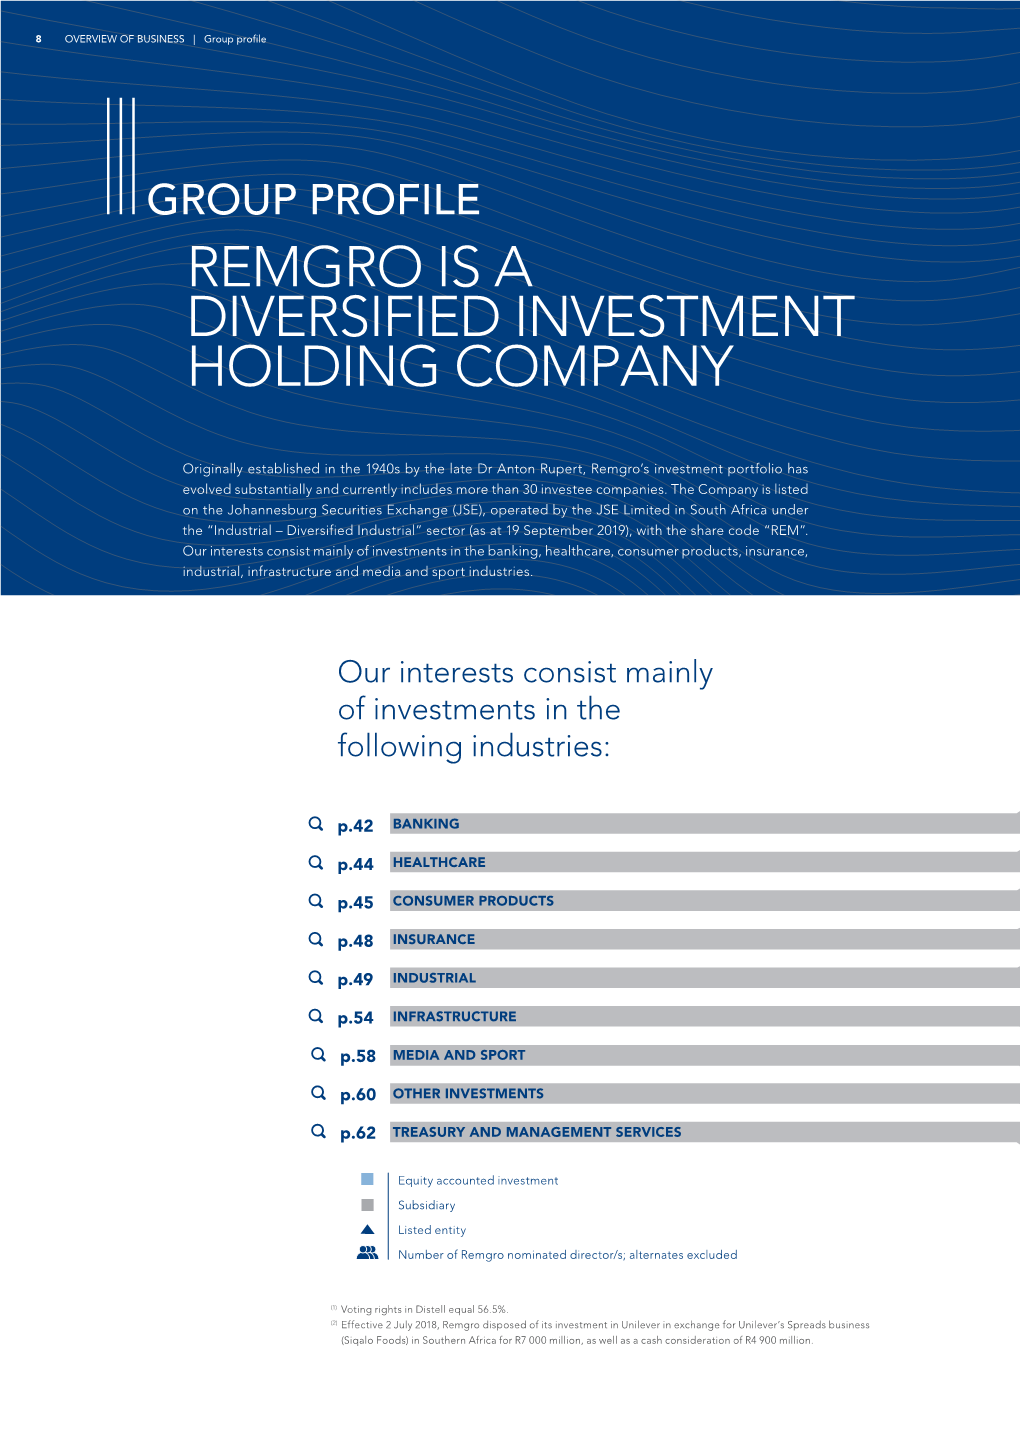 Remgro Is a Diversified Investment Holding Company